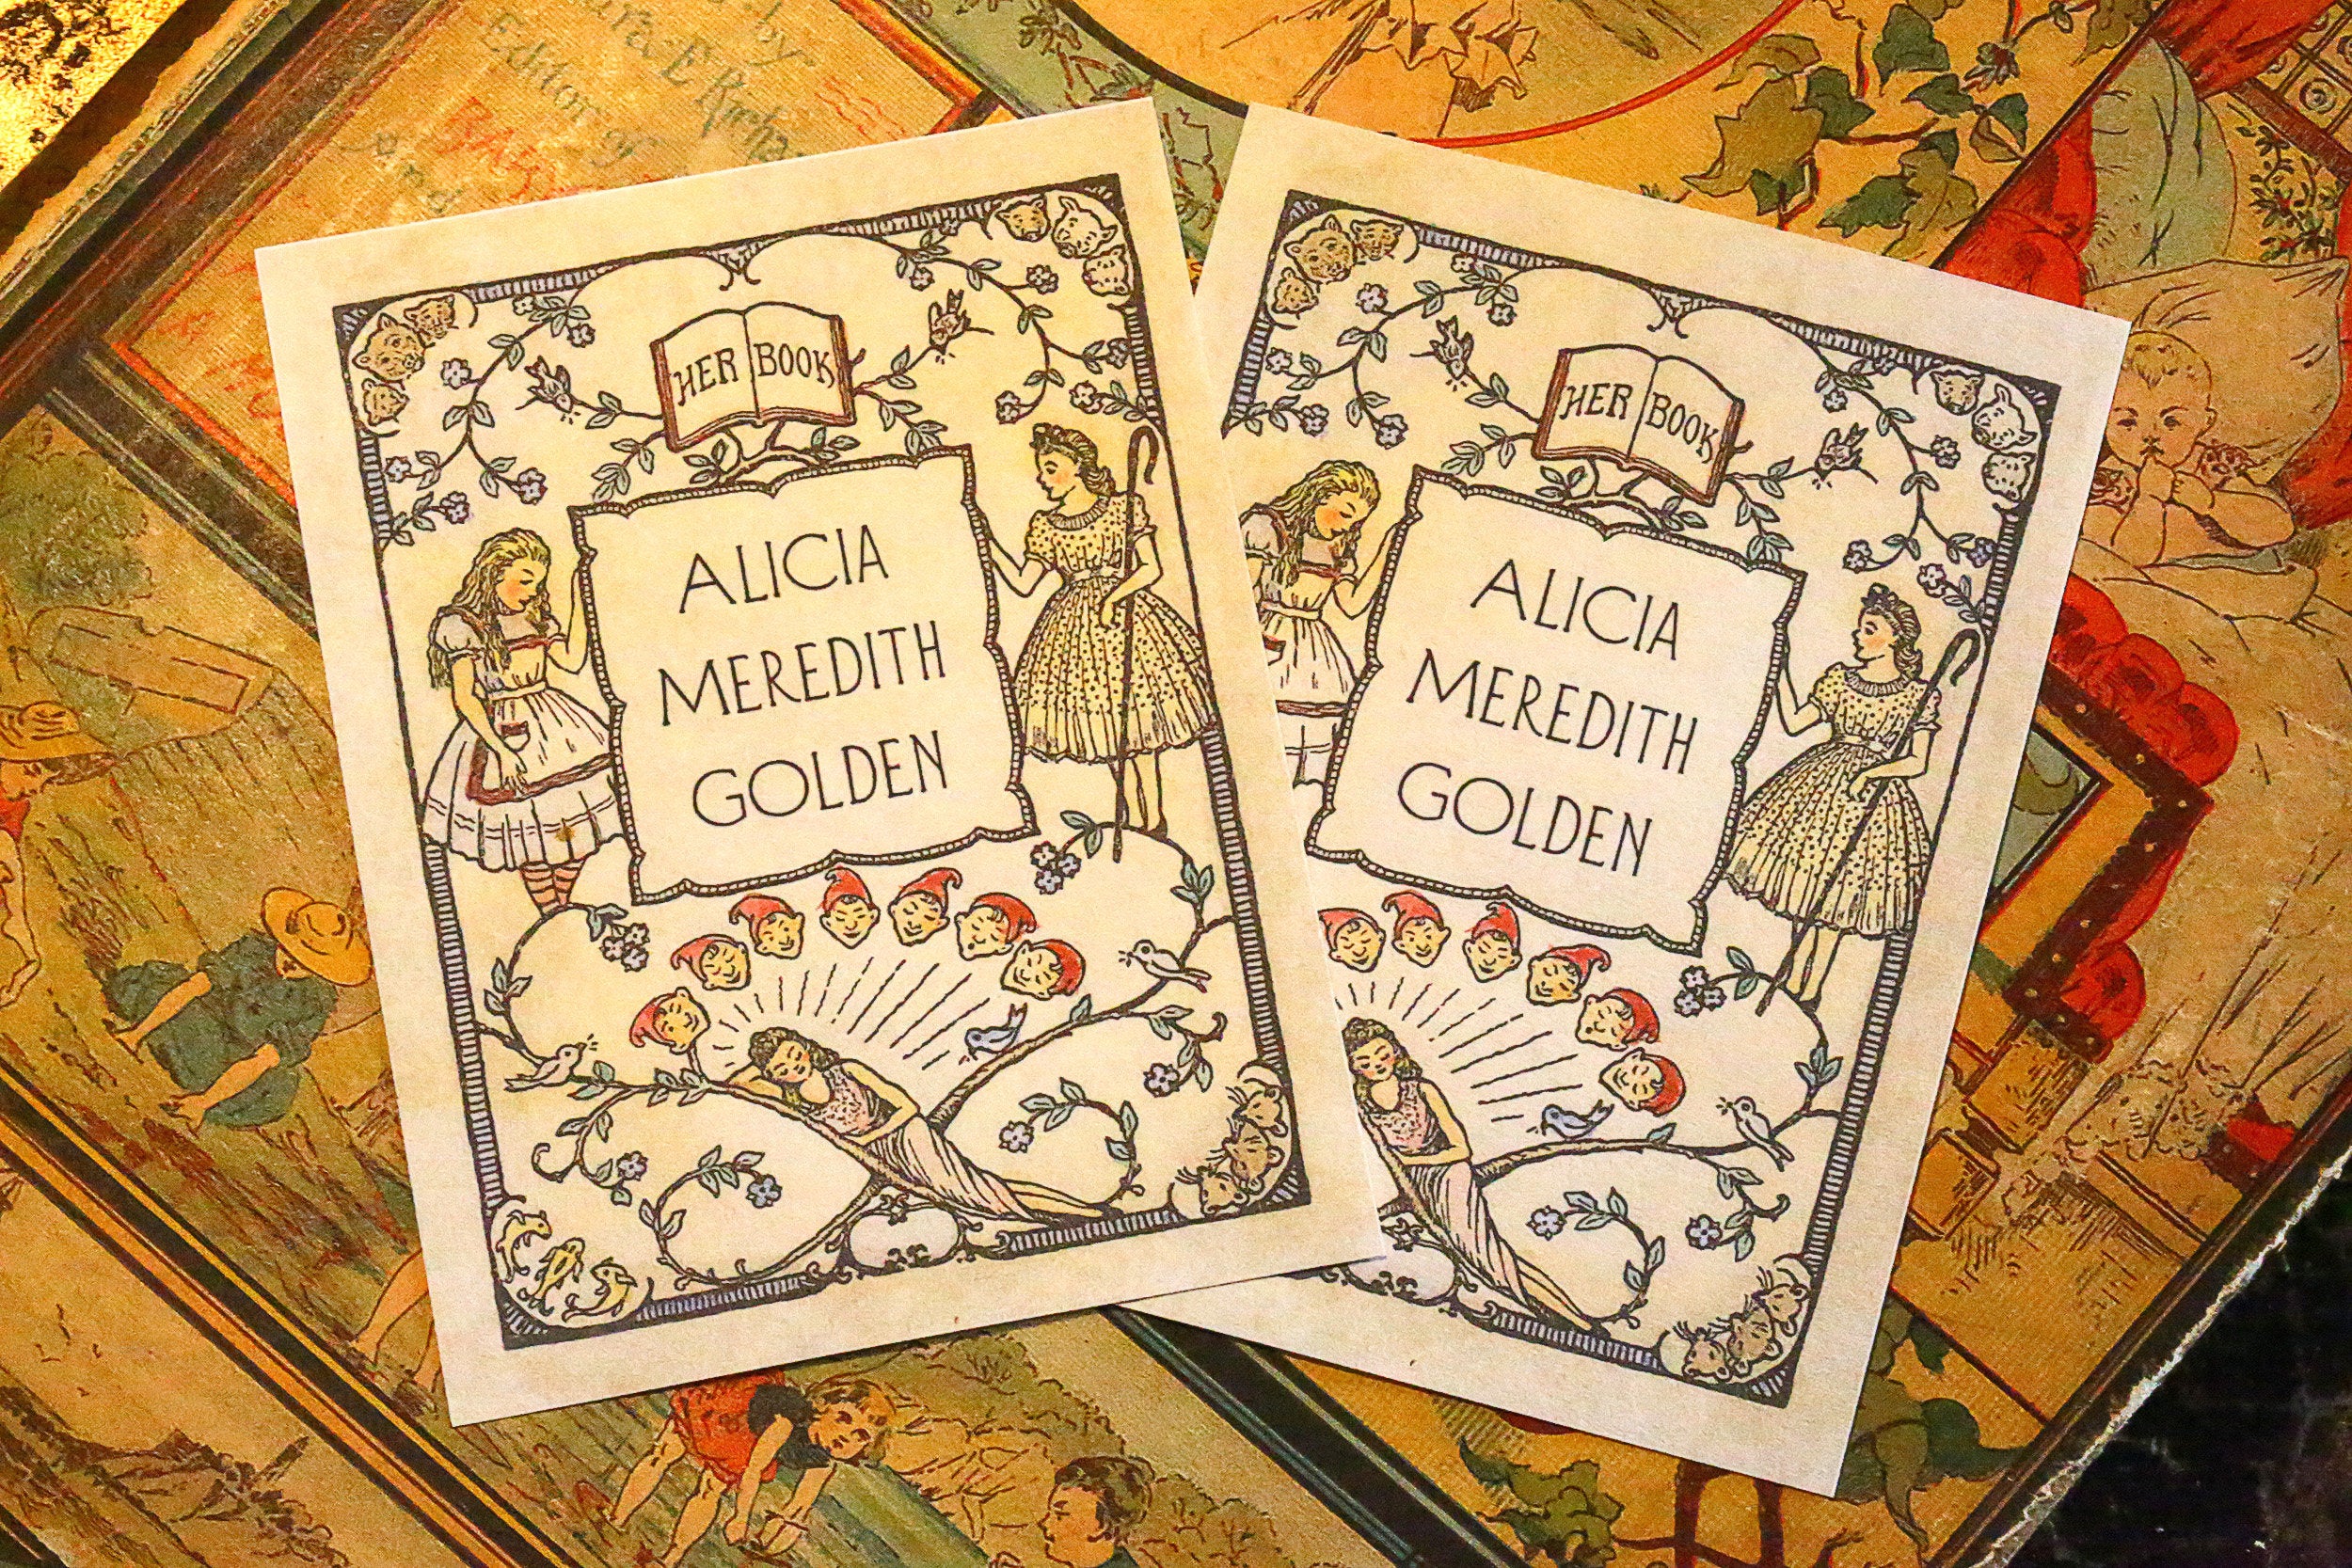 Fairytale Dream, Personalized Ex-Libris Bookplates For Her, Crafted on Traditional Gummed Paper, 3in x 4in, Set of 30